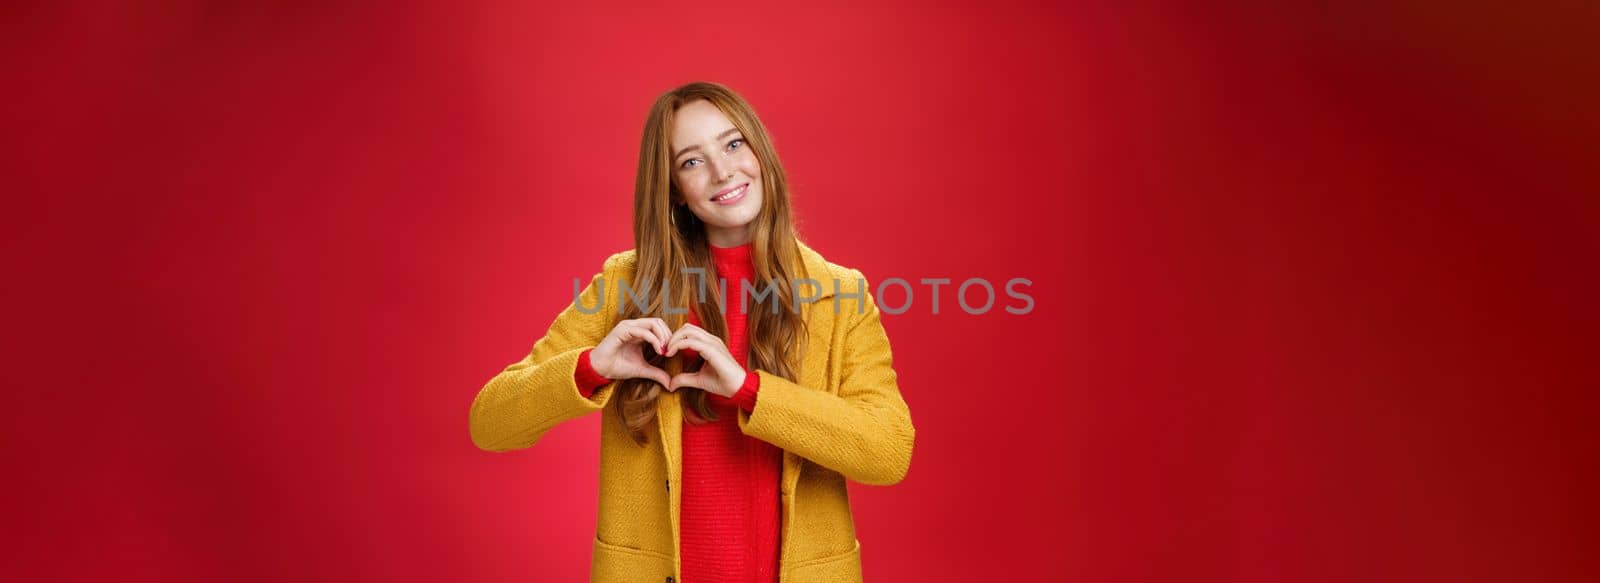 Love, romance and fall concept. Portrait of charming tender and gentle young redhead woman in yellow coat showing heart gesture making confession in sympathy, smiling cute at camera over red wall.